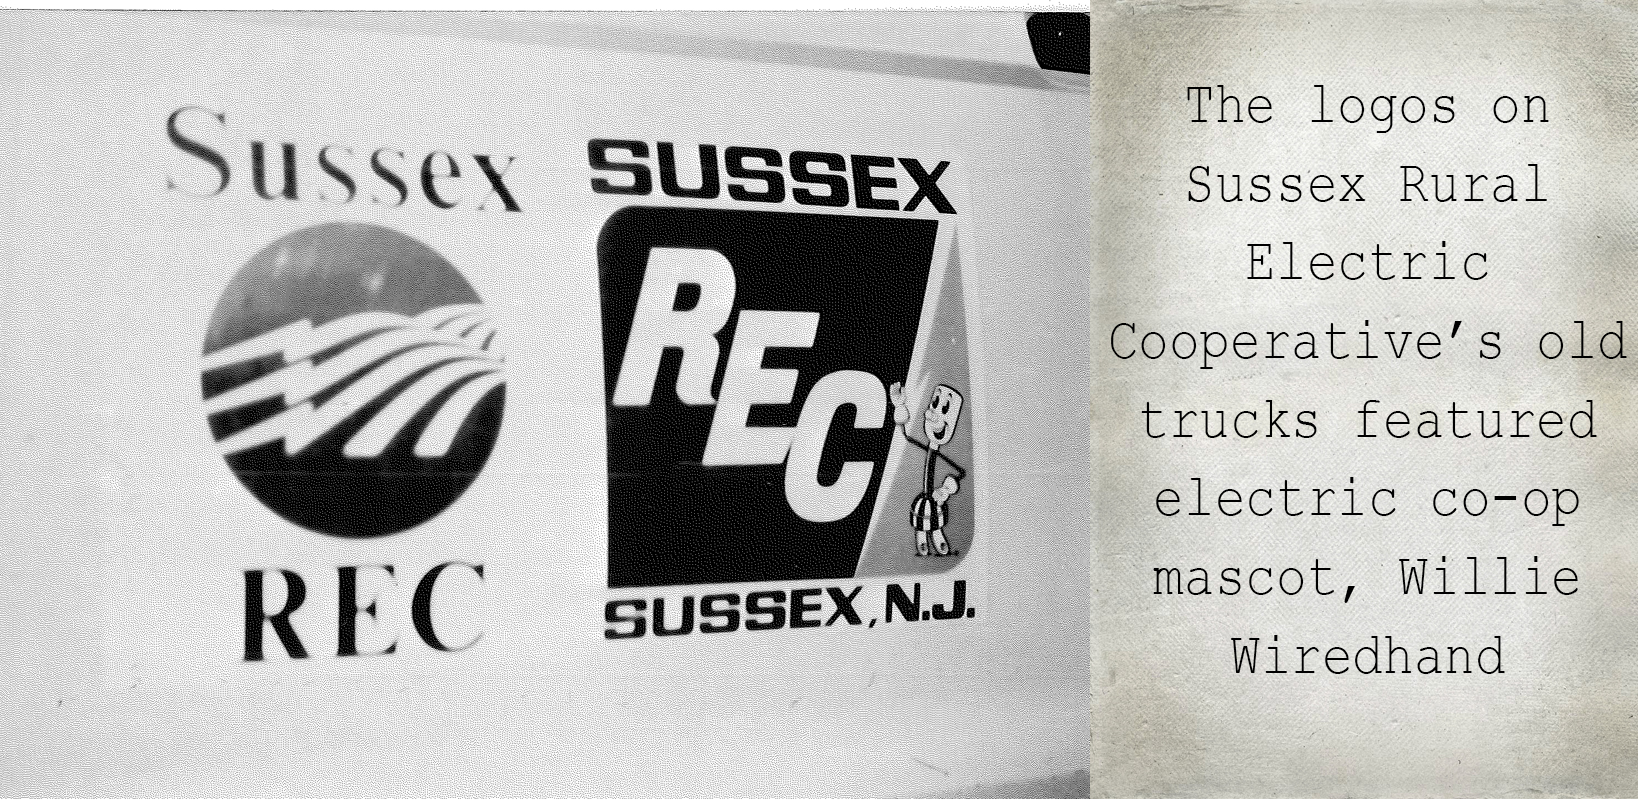 The logos on Sussex Rural Electric Cooperative's old trucks features electric co-op mascot, Willie Wiredhand